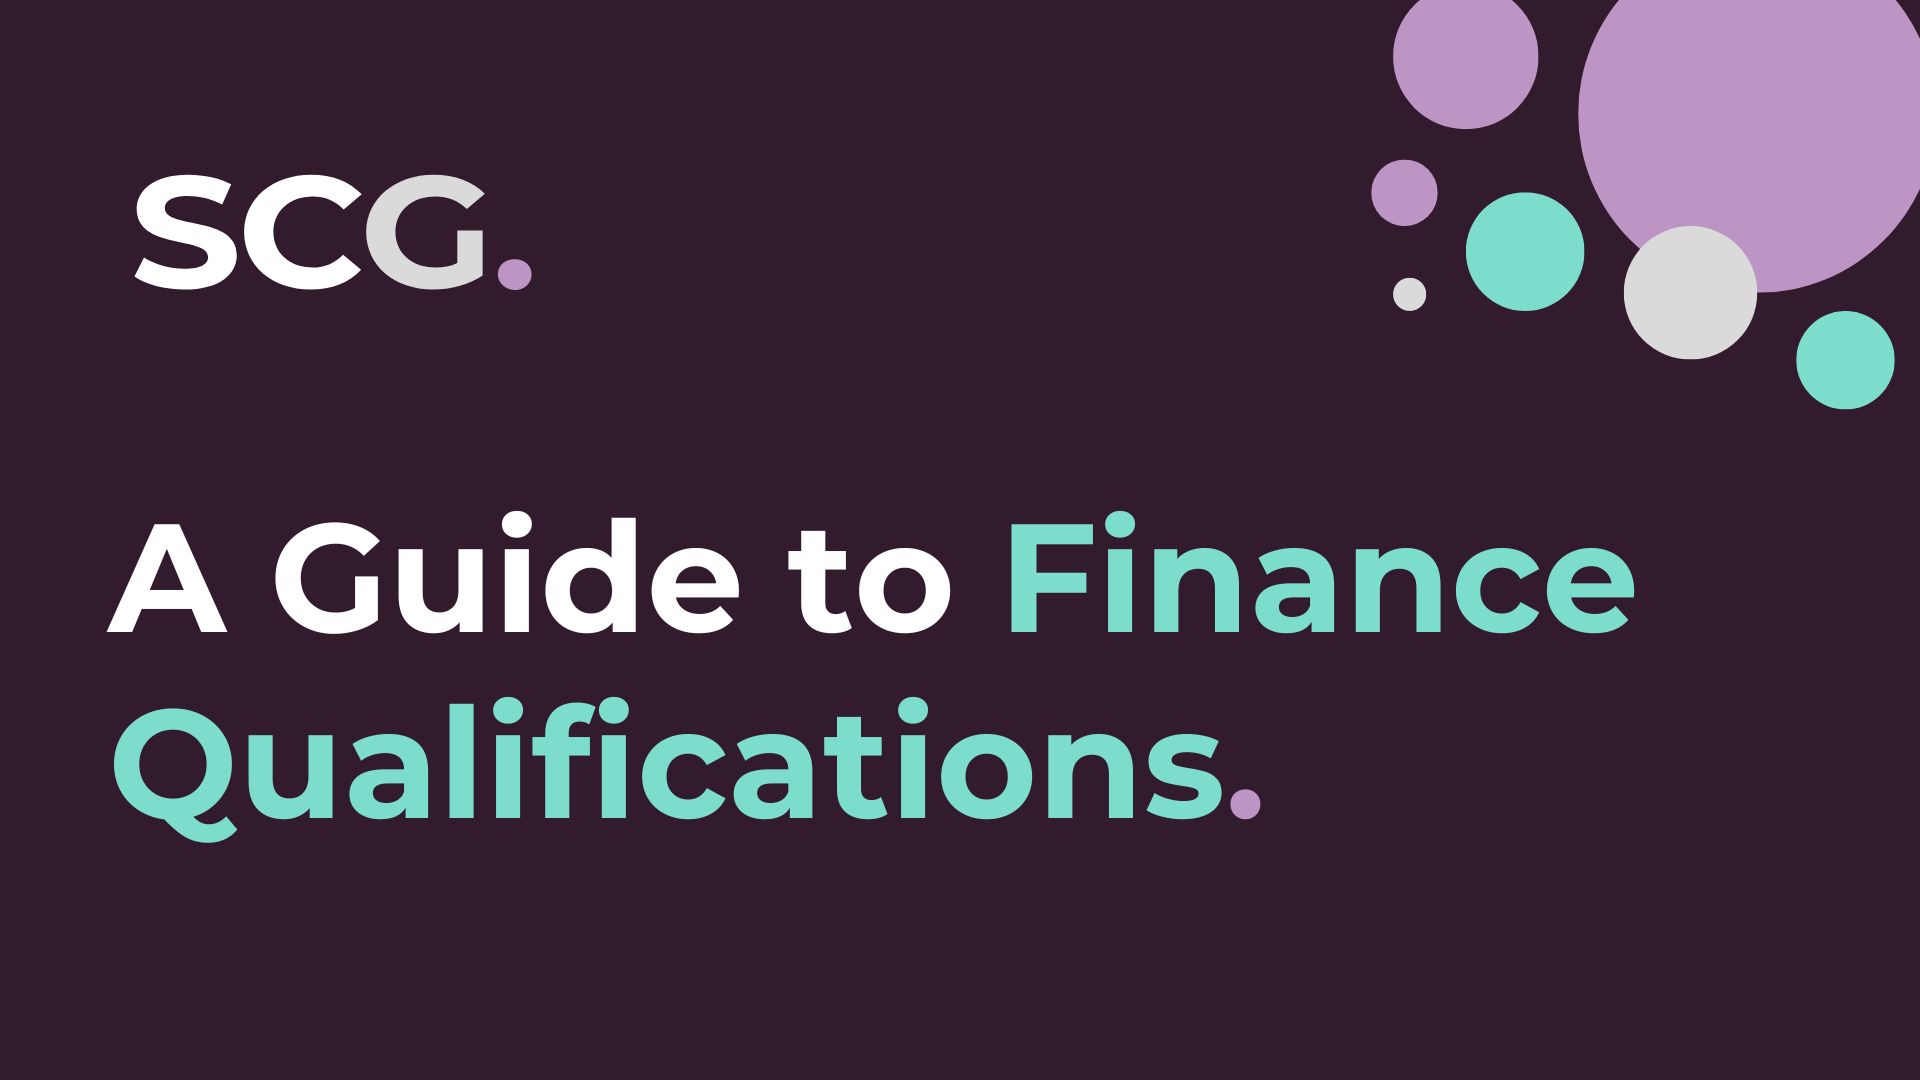 A Guide to Finance Qualifications